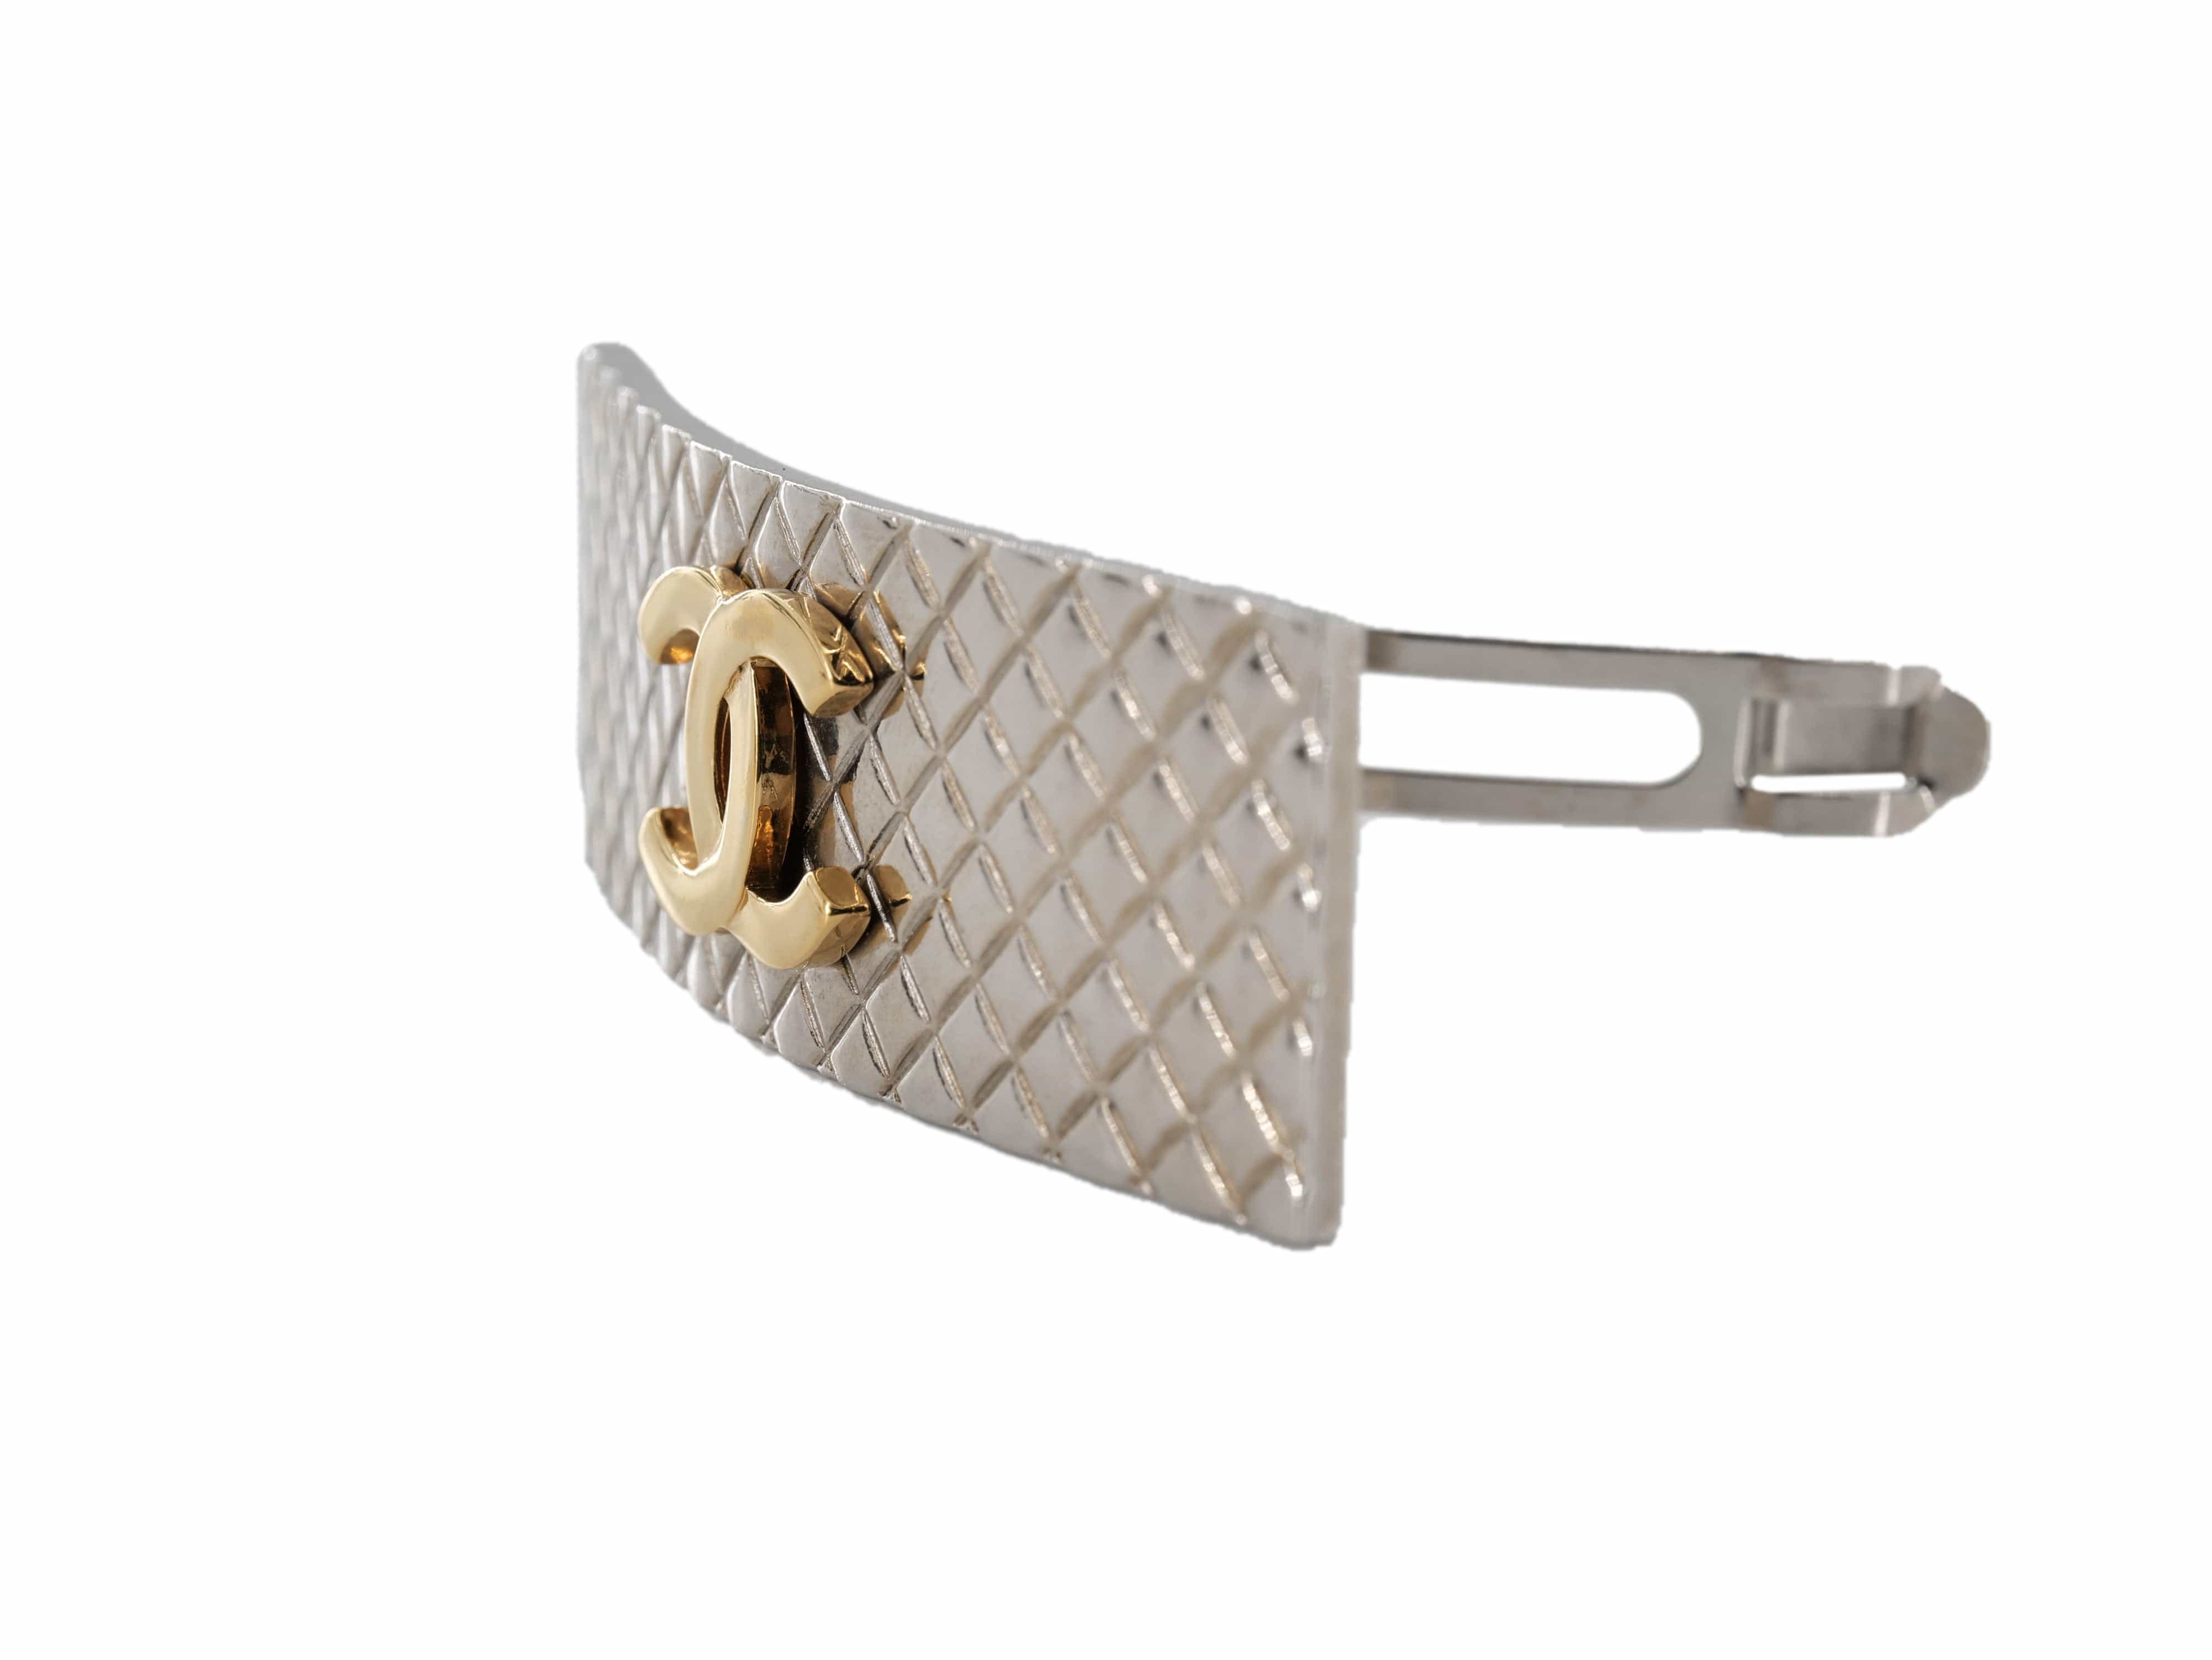 Chanel Chanel Vintage Gold and Silver CC Hair Barette - AWC1280